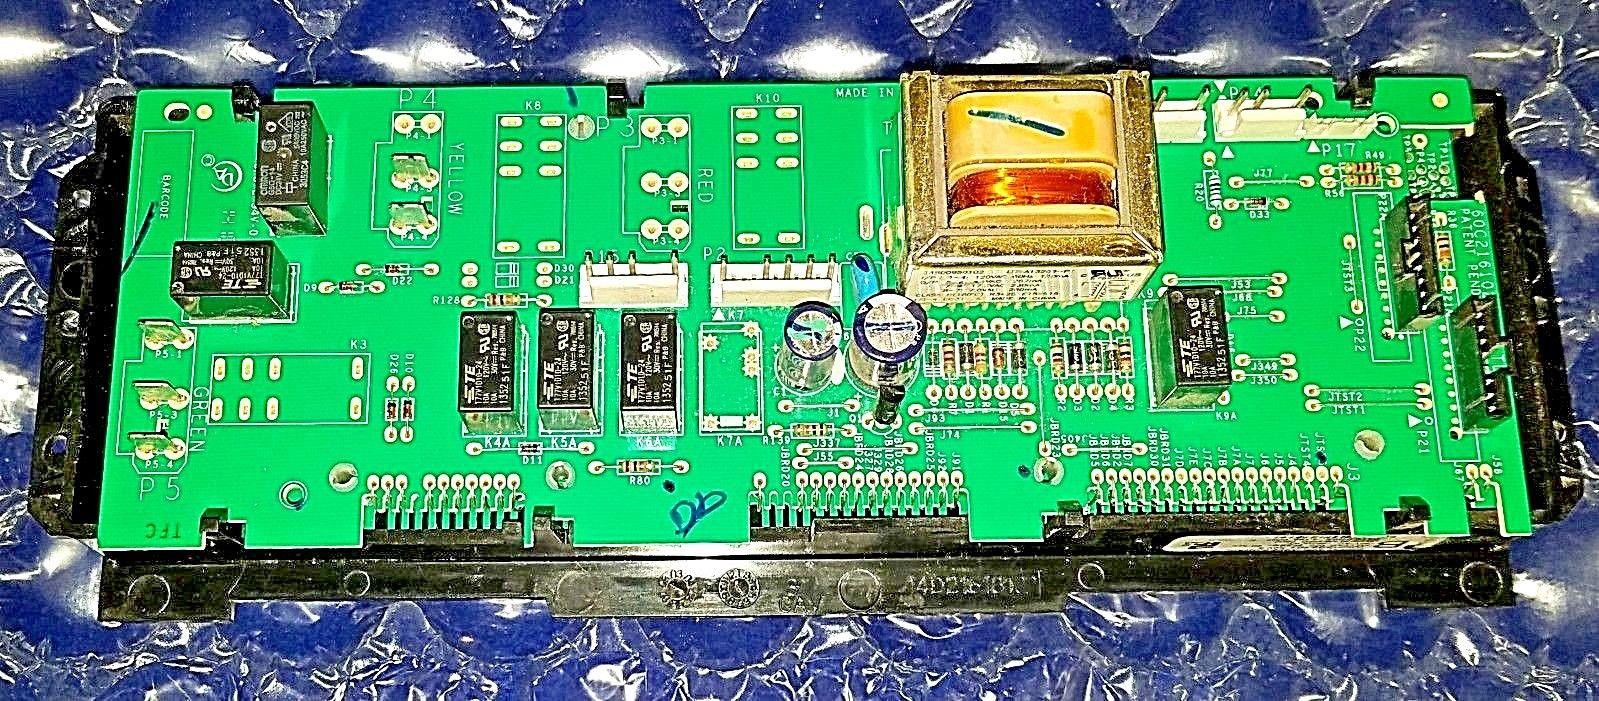 Whirlpool, Maytag Range/Oven Control Board (Pre-Owned) W10177195 (Free Shipping)